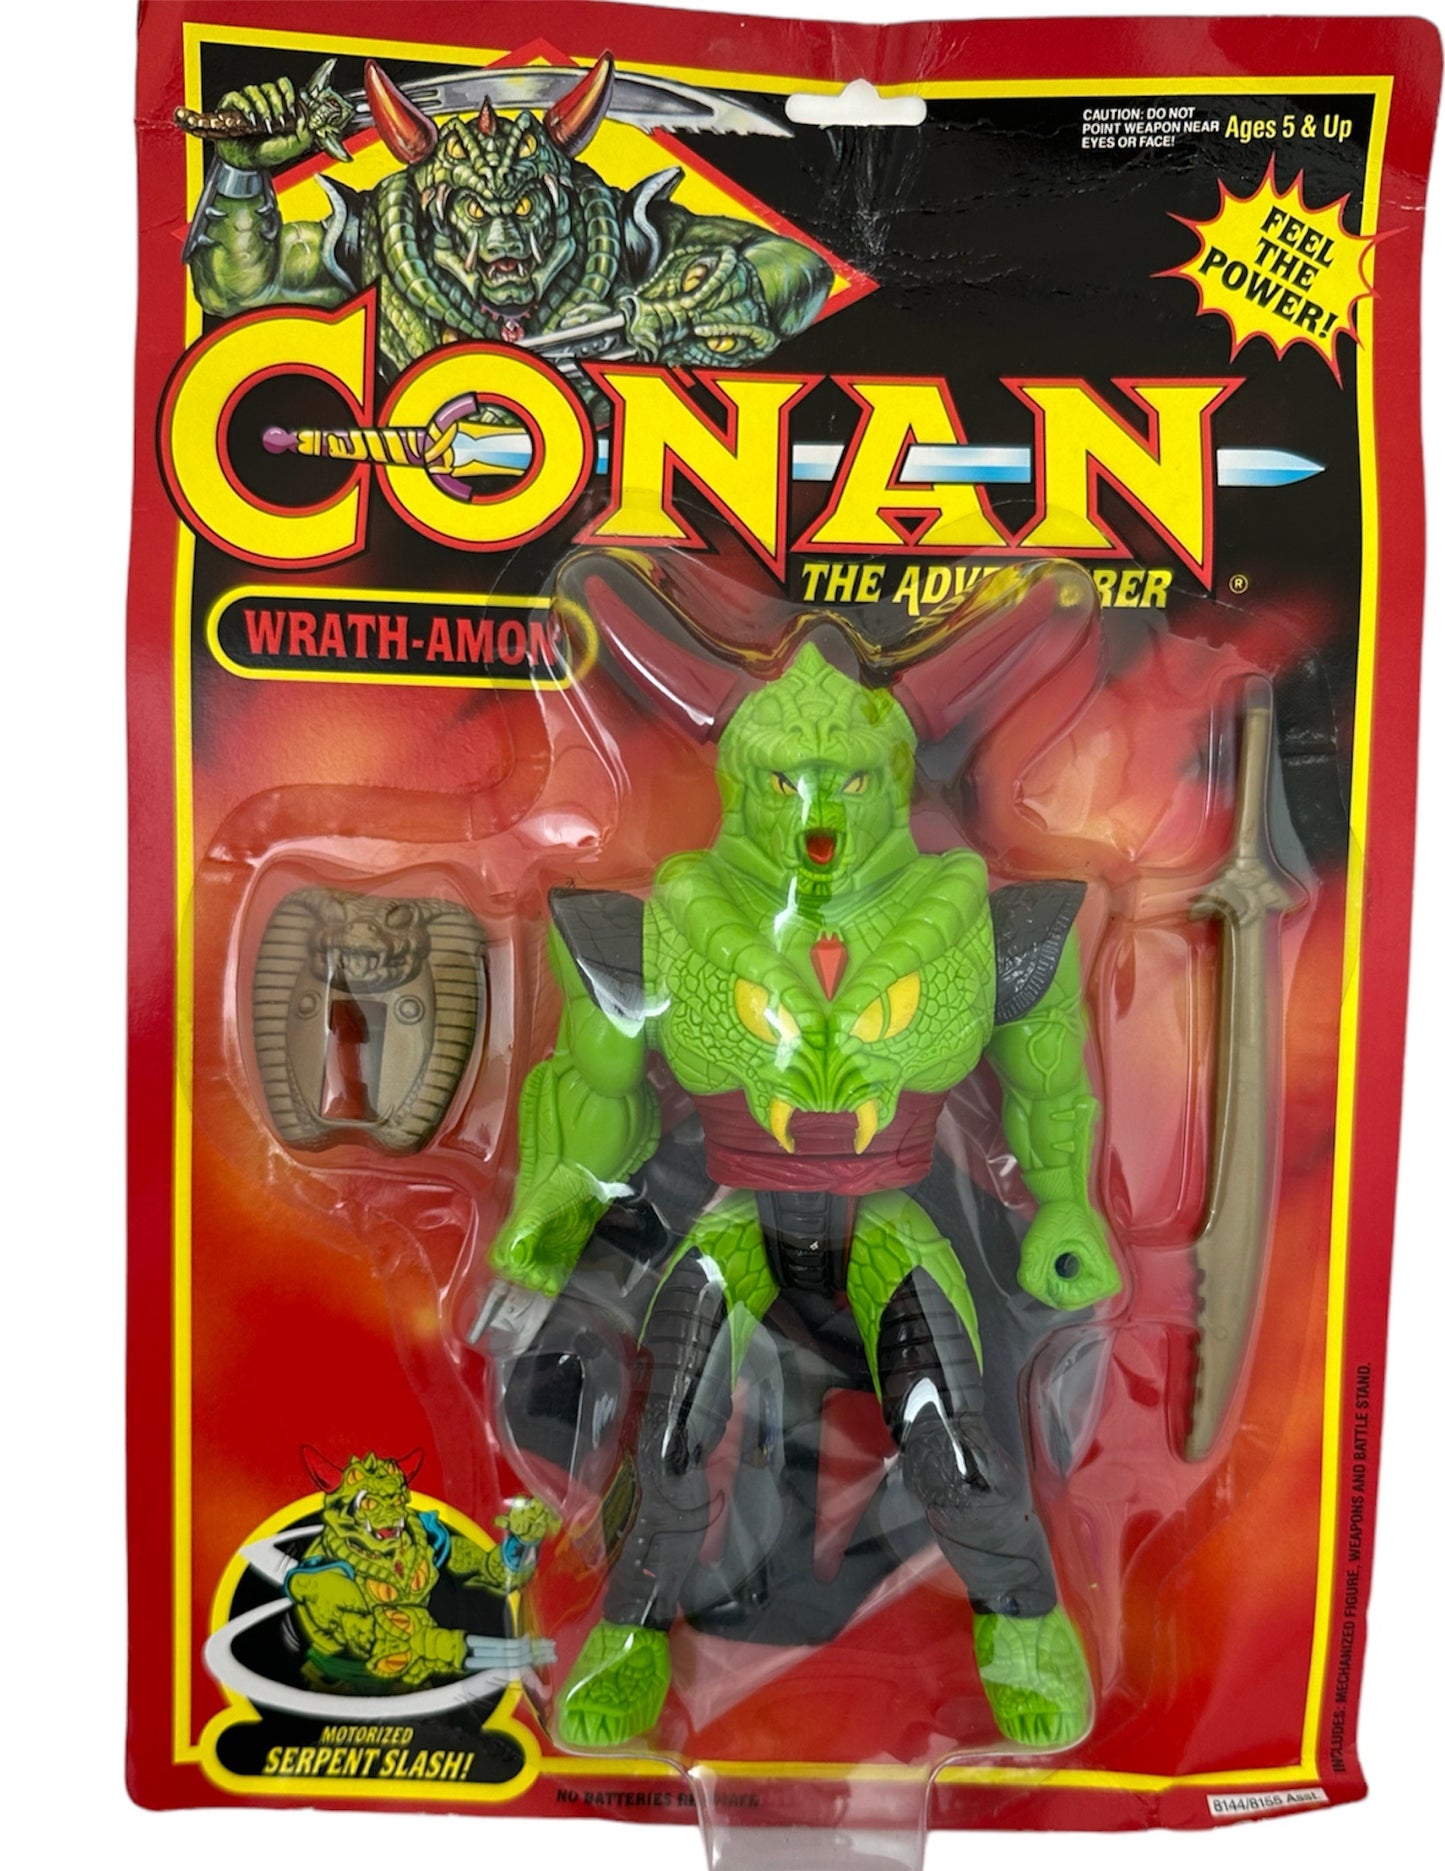 Vintage 1993 Conan The Adventurer - Wrath-Amon 8 Inch Action Figure With Motorized Serpent Slash Action - Brand New Factory Sealed Shop Stock Room Find